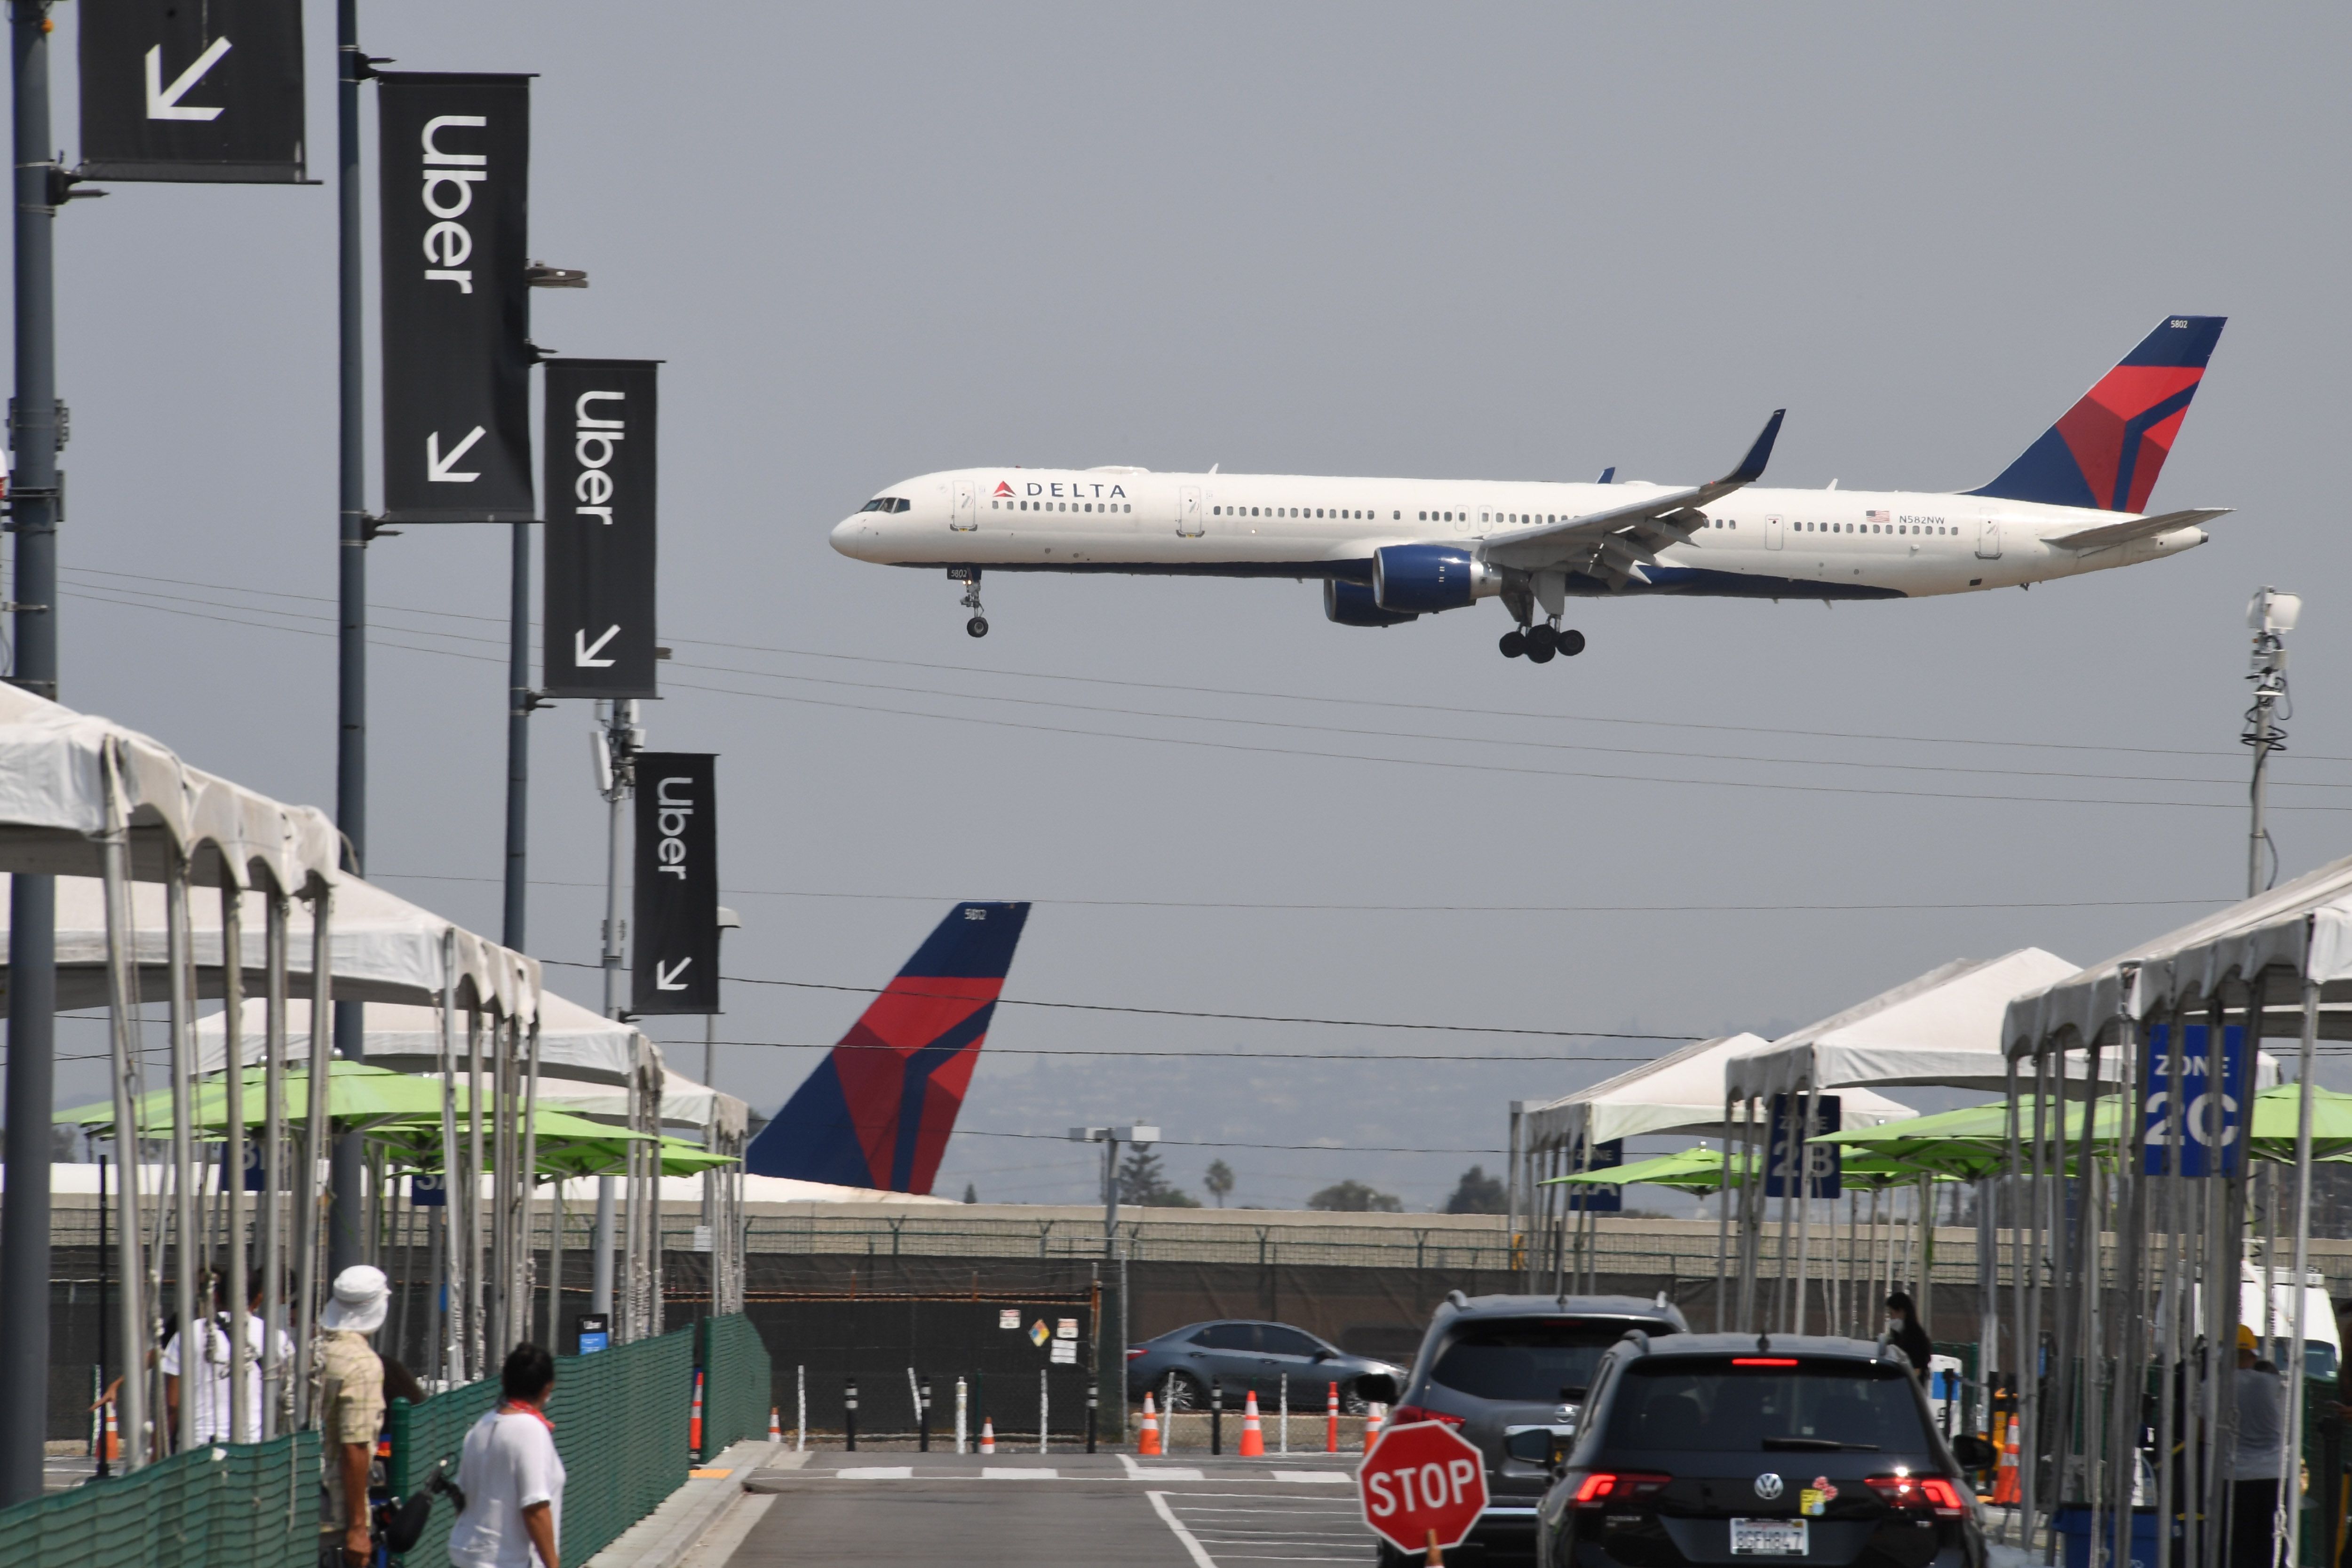 Delta aircraft flies over an Uber pick up location